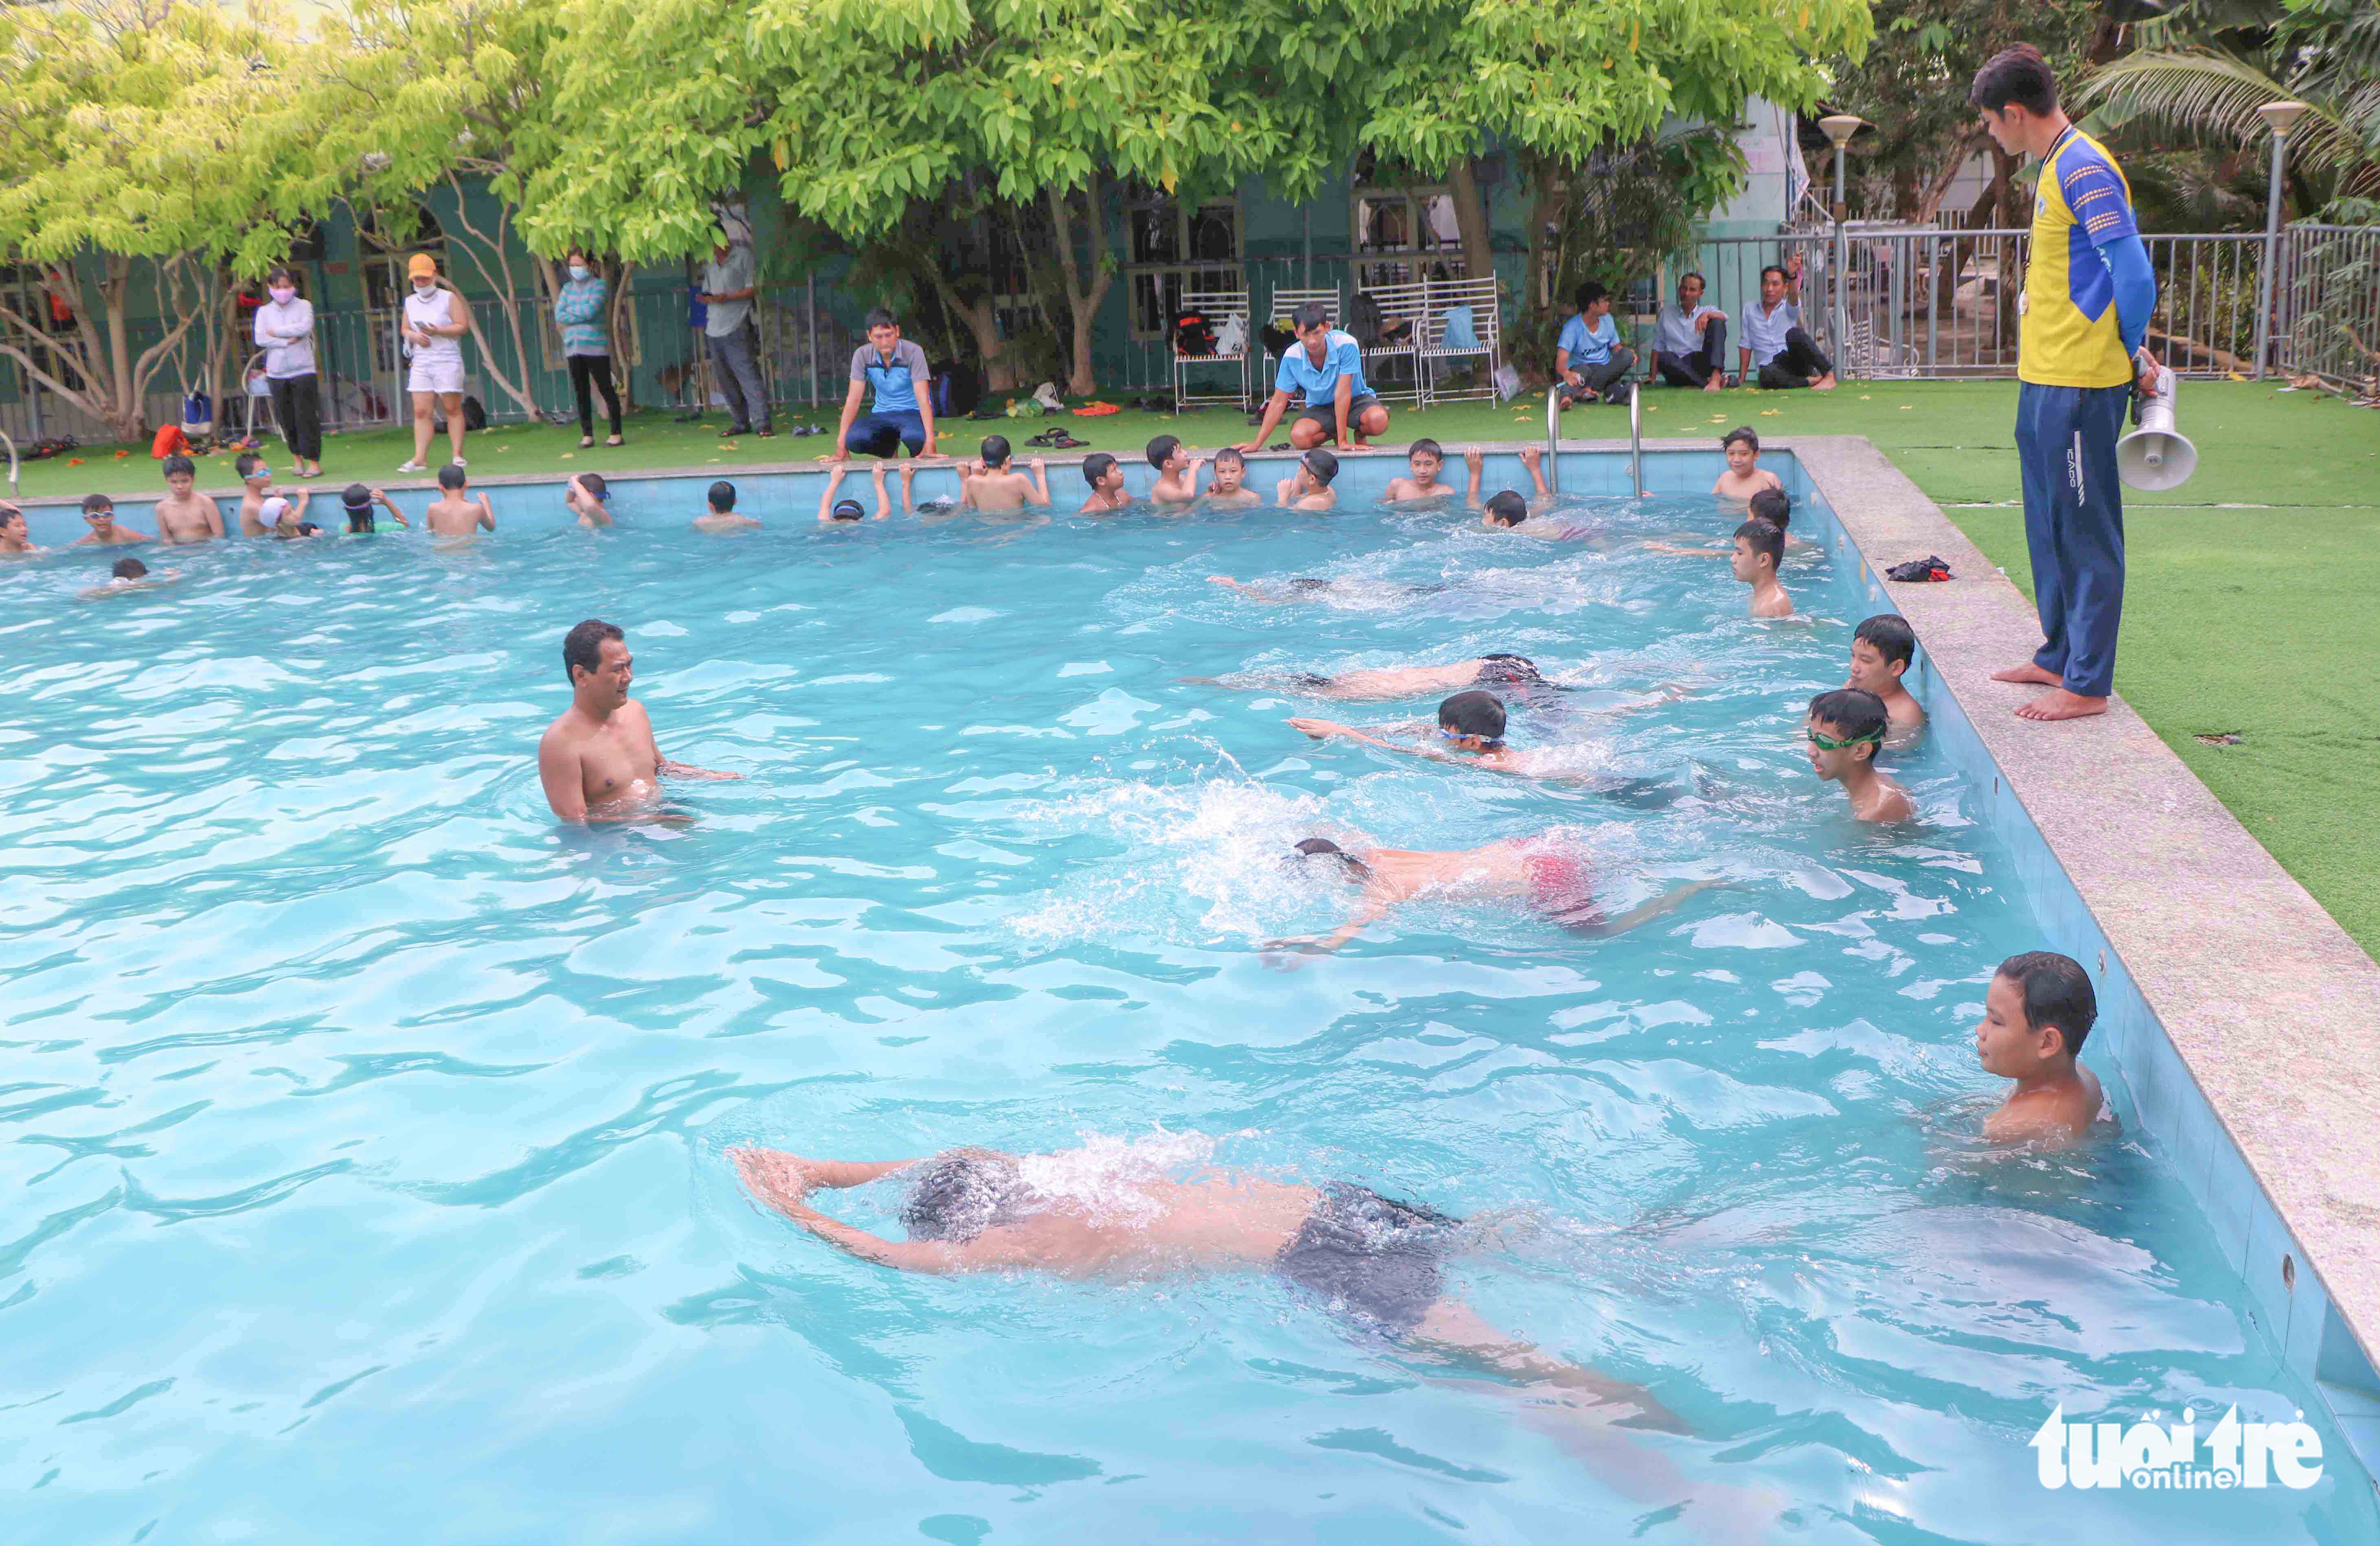 Nearly 1,000 children take free swimming lessons in south-central Vietnam